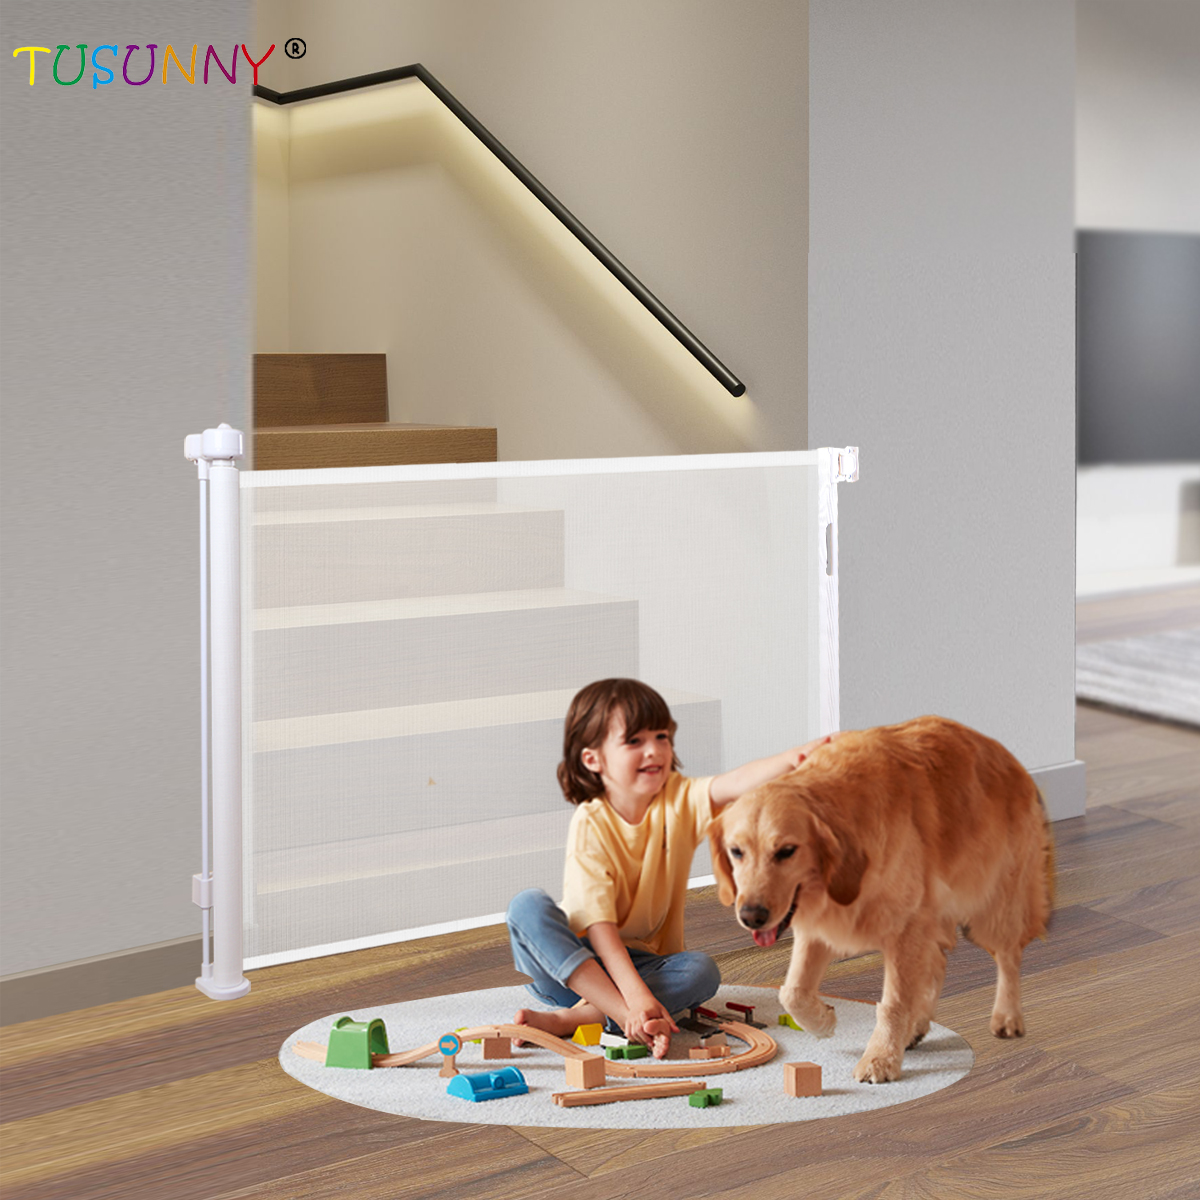 SH20.006B02 Baby Safety Retractable Mesh Gate Extendable Stair Gates For Baby And Pet